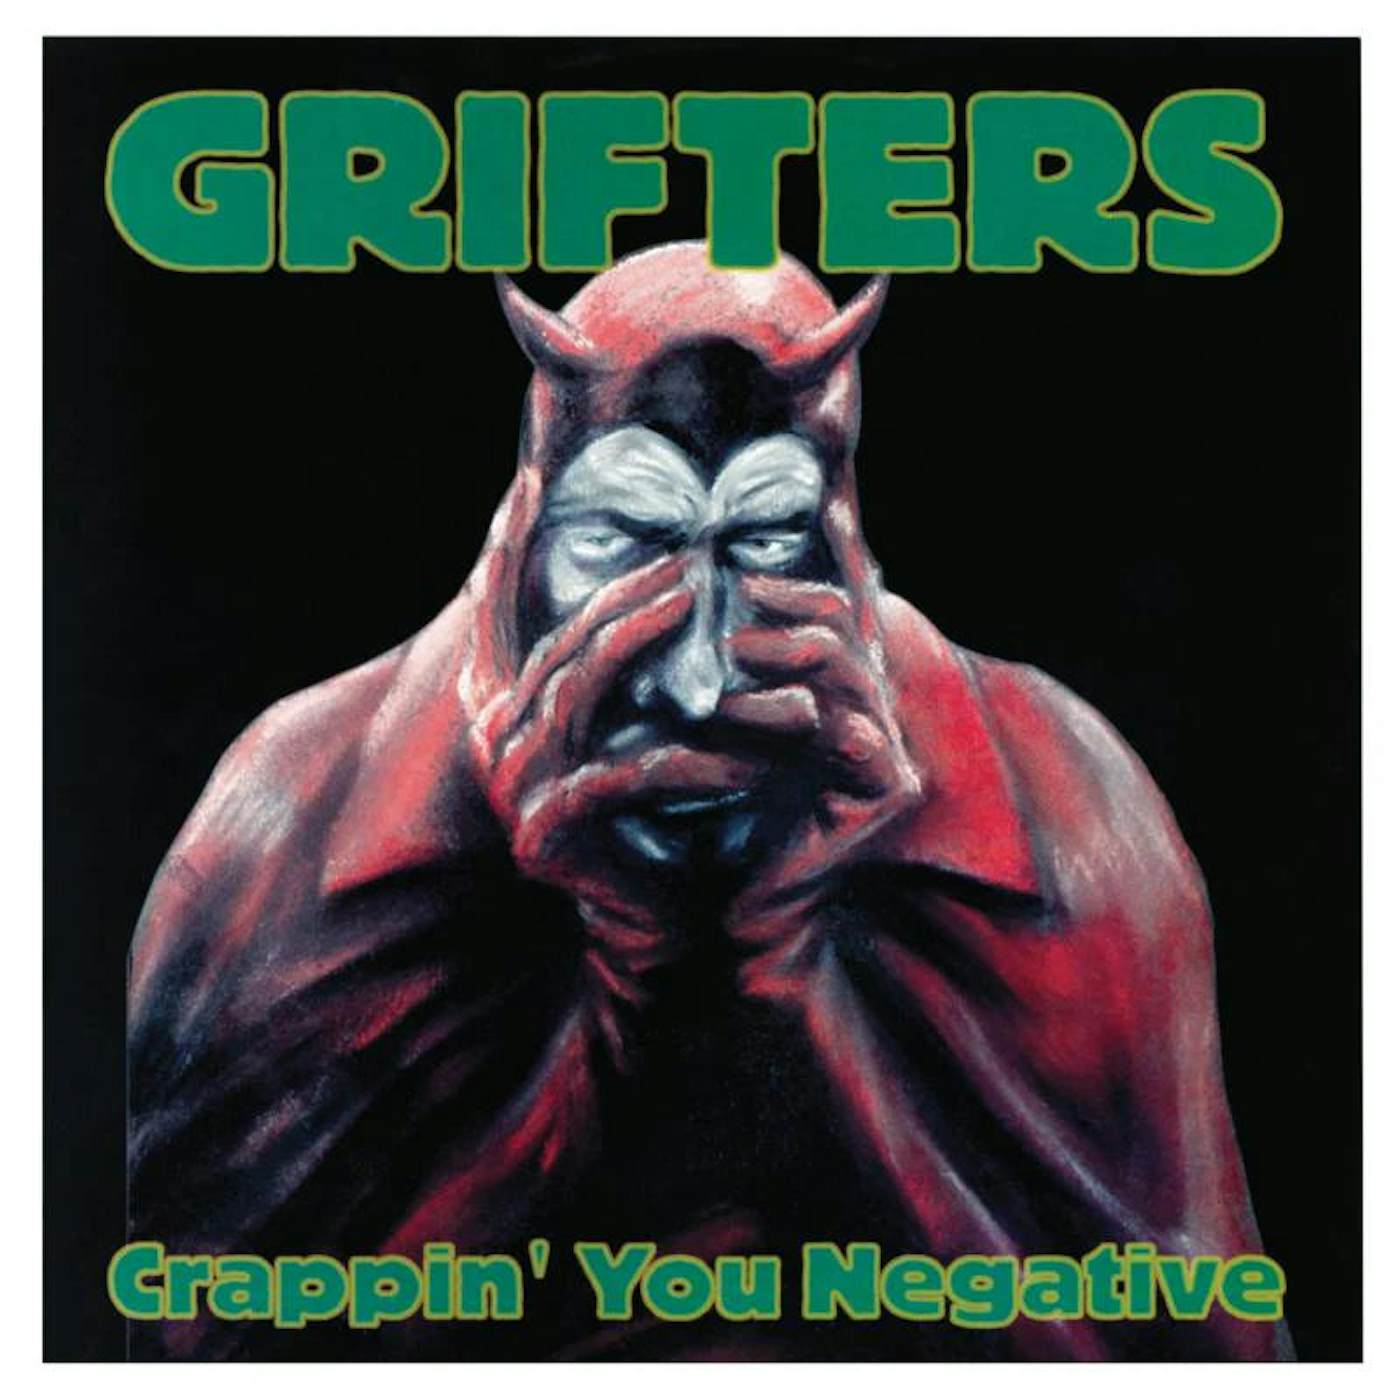 The Grifters LP - Crappin You Negative (Vinyl)